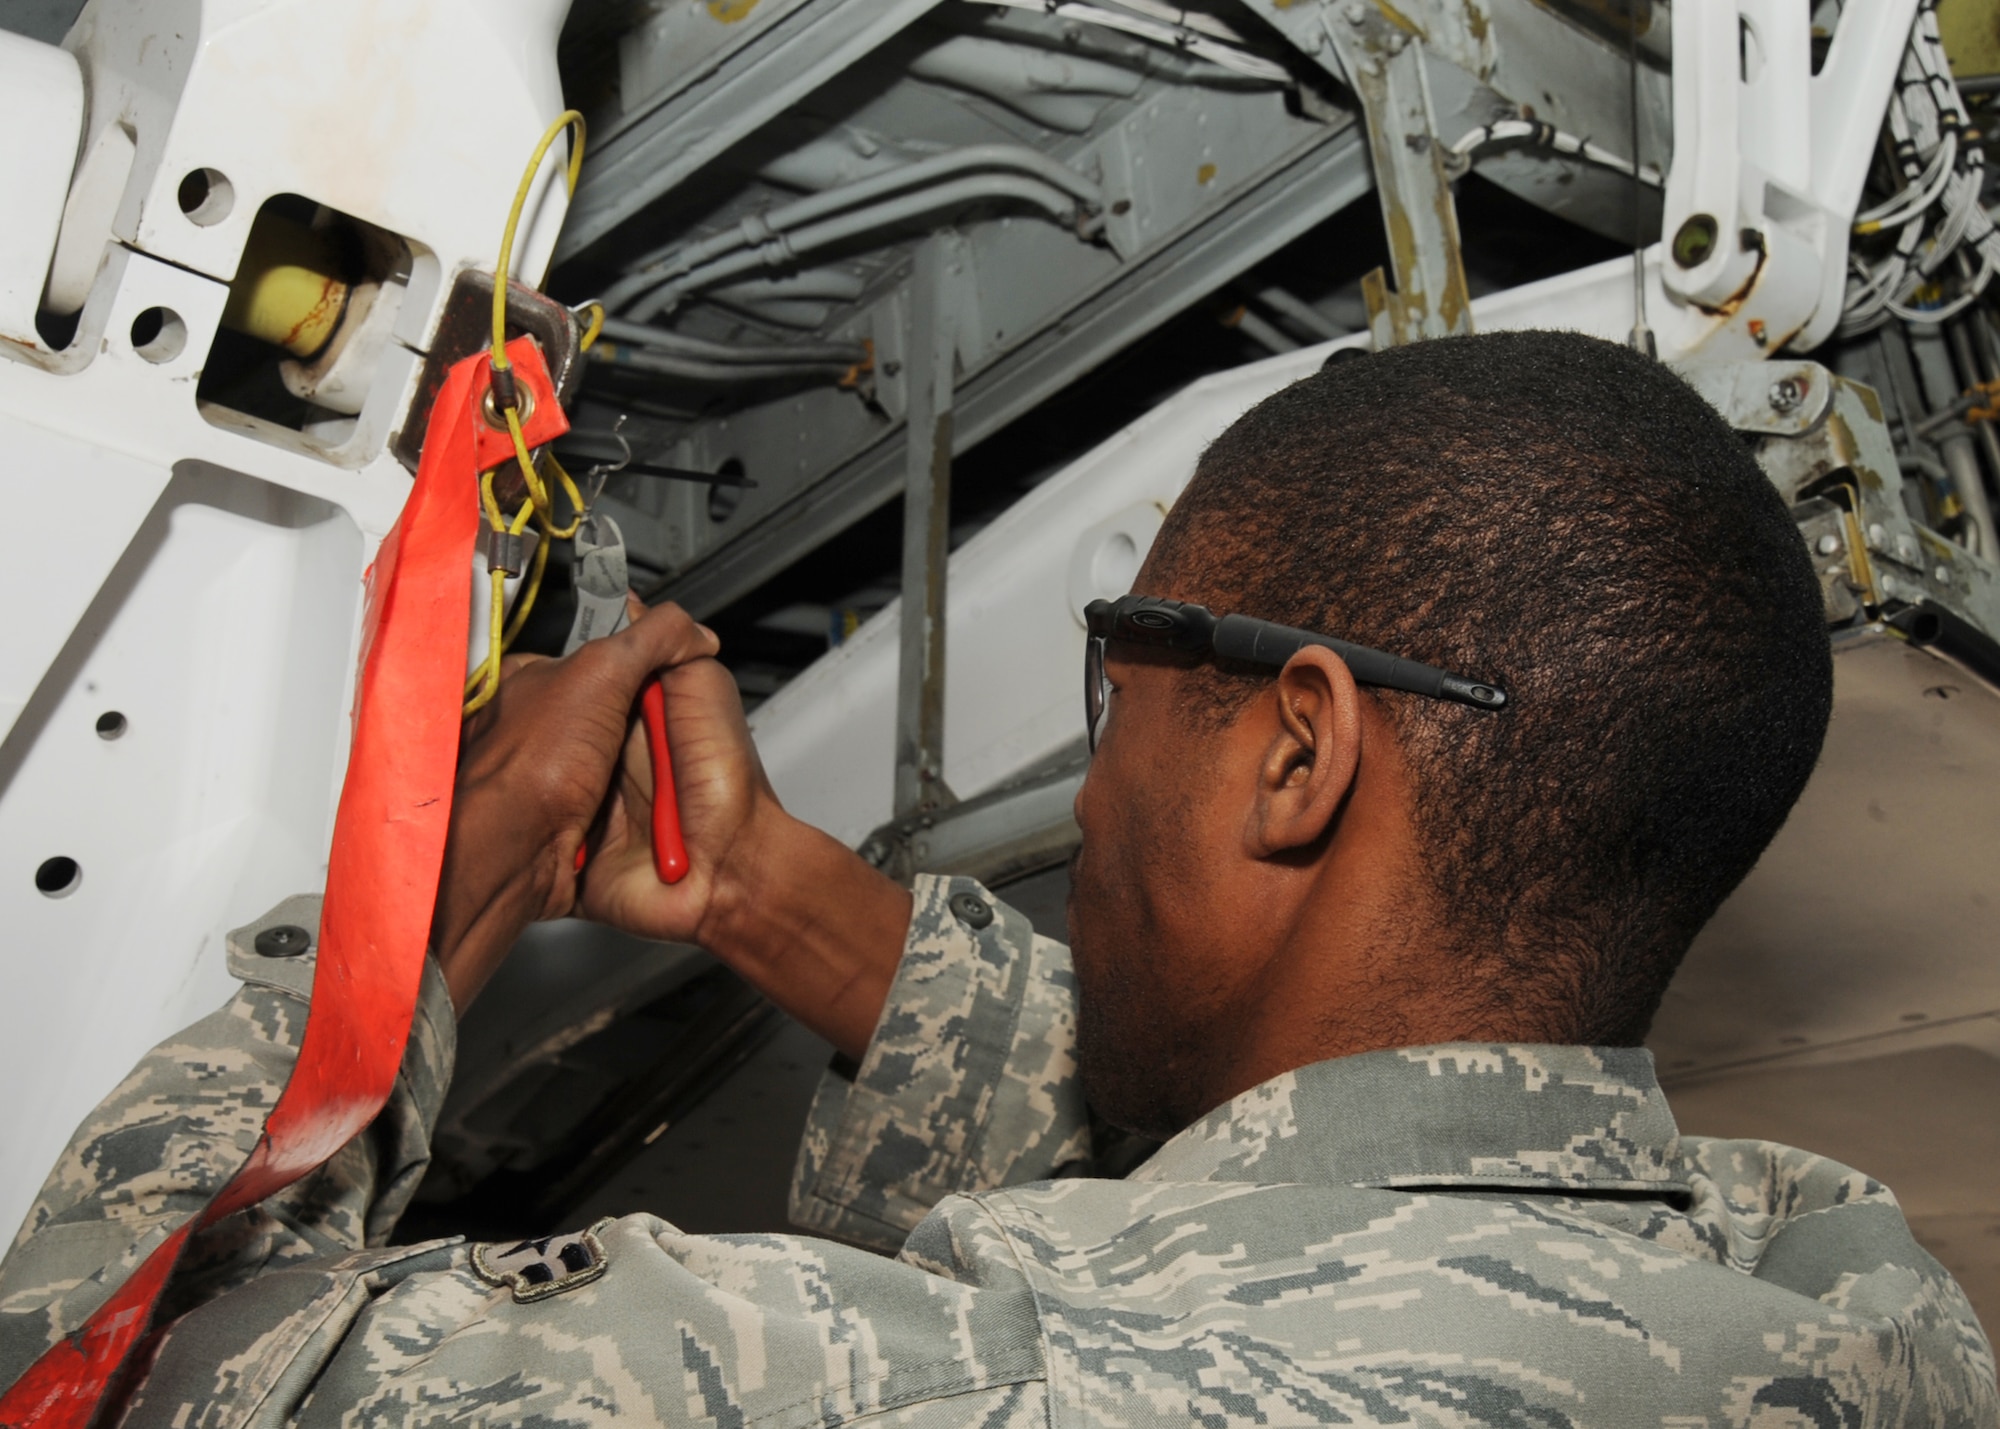 Airman 1st Class Carlton Creary, 22nd Aircraft Maintenance Squadron crewchief, removes a broken pin from the main landing gear of a KC-135 Stratotanker during a preflight inspection March 29, 2010, McConnell Air Force Base, Kan. McConnell’s KC-135 Stratotankers were inspected for readiness during a Nuclear Operational Readiness Exercise. (U.S. Air Force photo/Senior Airman Maria Ruiz)